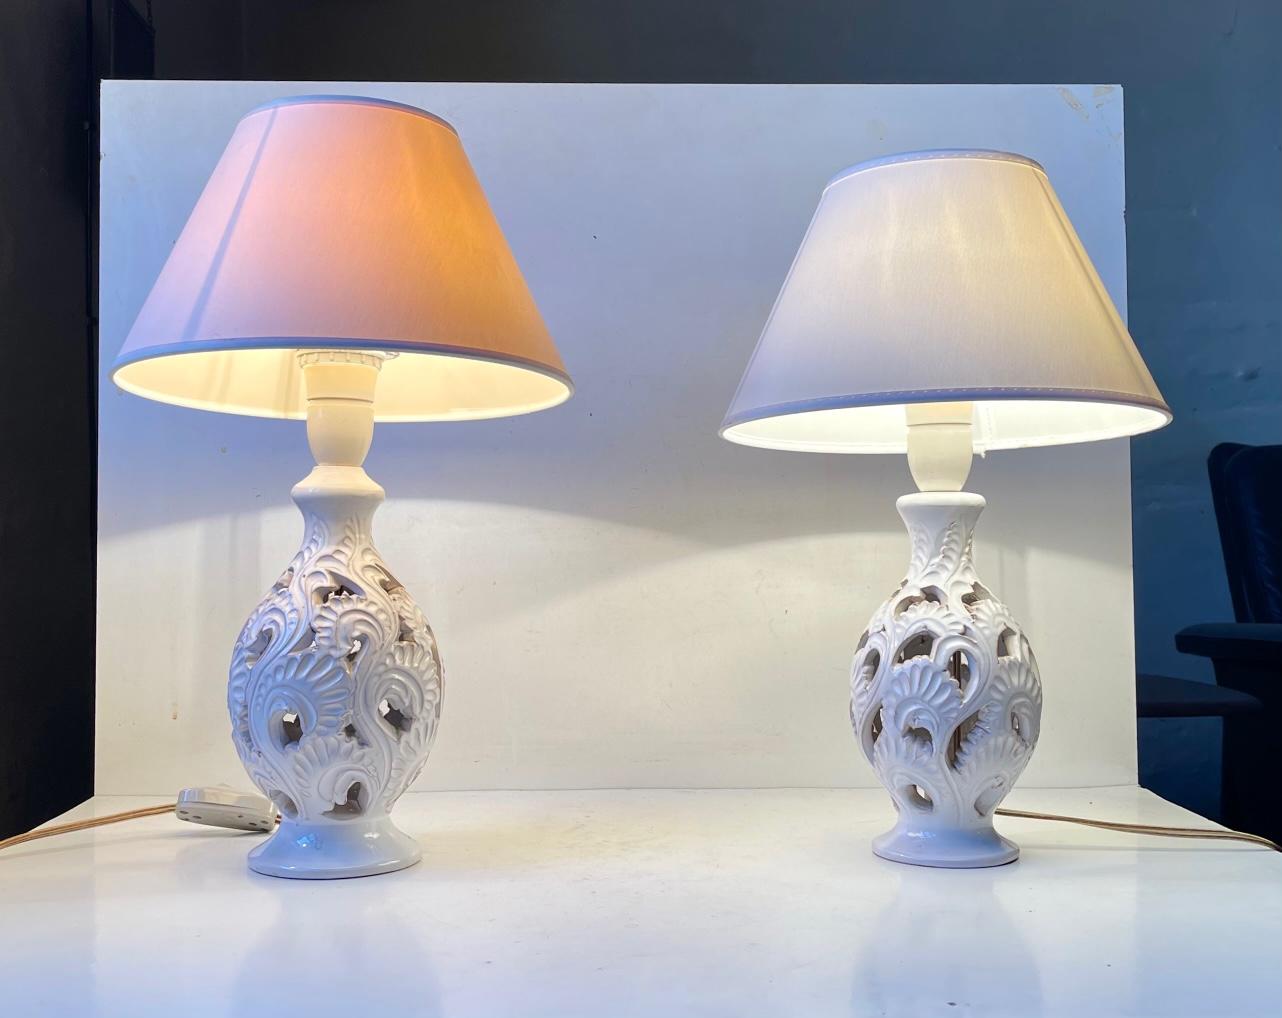 A set of white glazed danish 1940s Table Lights with Floral impressions perforated to the pottery 'Body'. Arts and Craft - Art Nouveau styling. Both designed and manufactured by Hans Rudolf Petersen in Denmark during the late 1930s or early 40s.